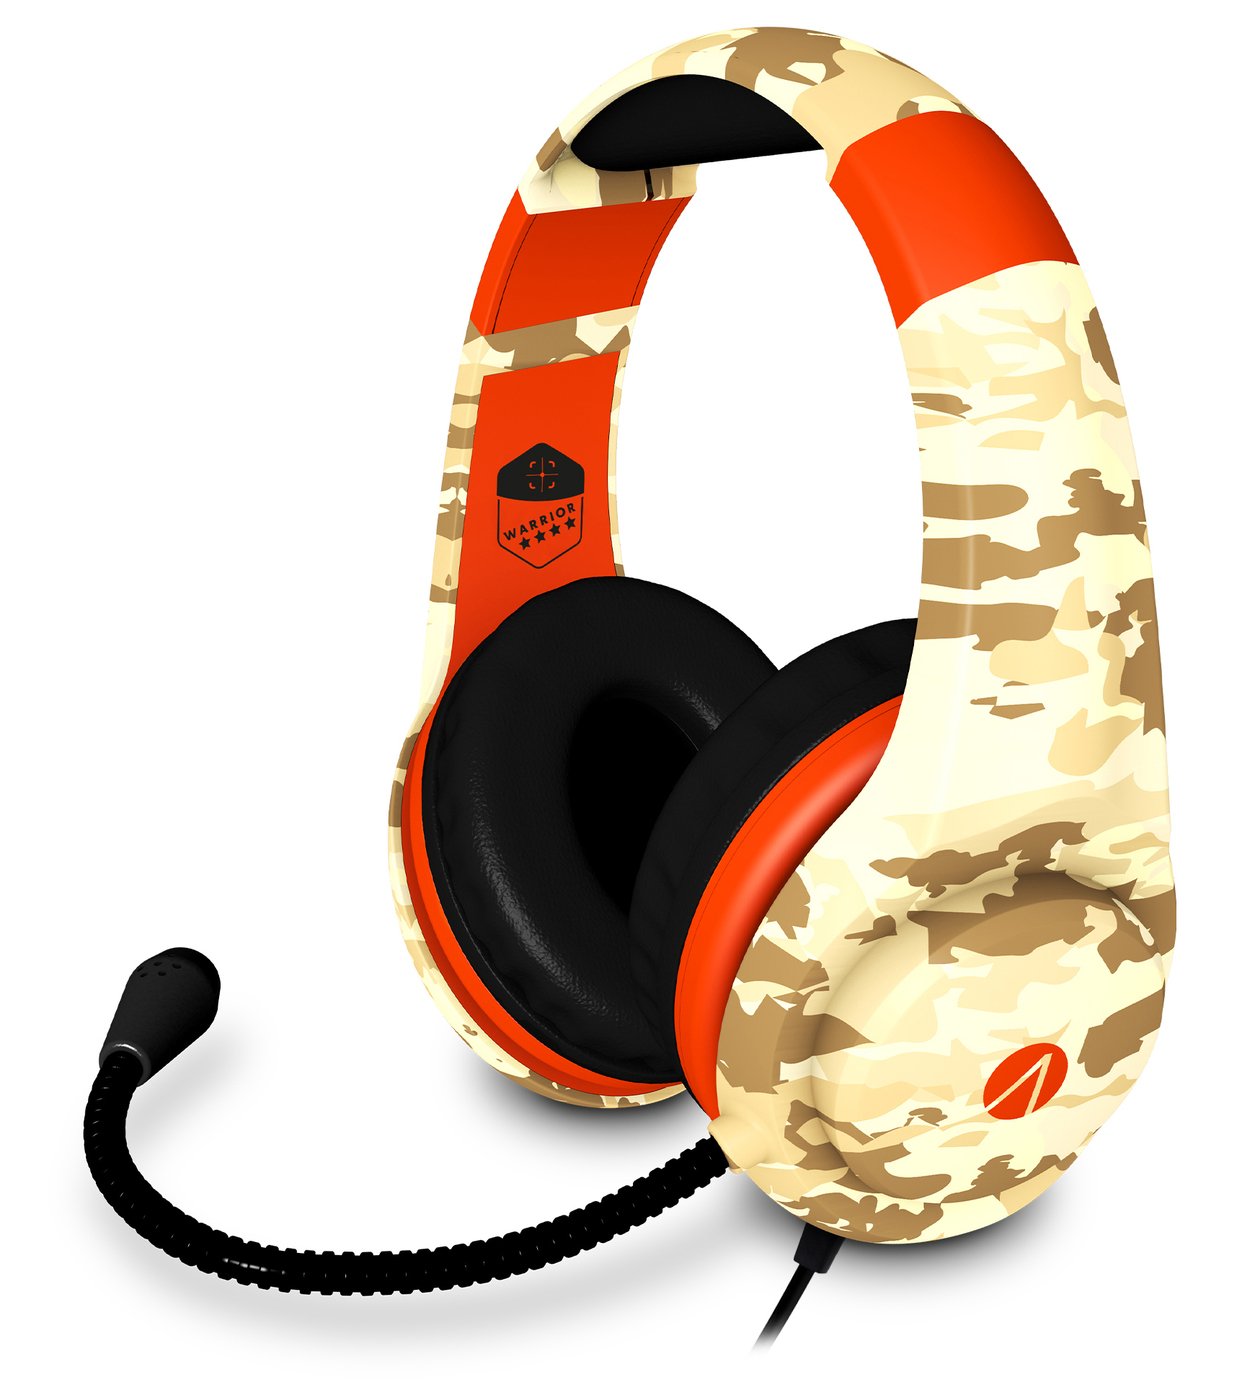 Stealth Warrior Xbox One, PS4, PC Headset - Camo